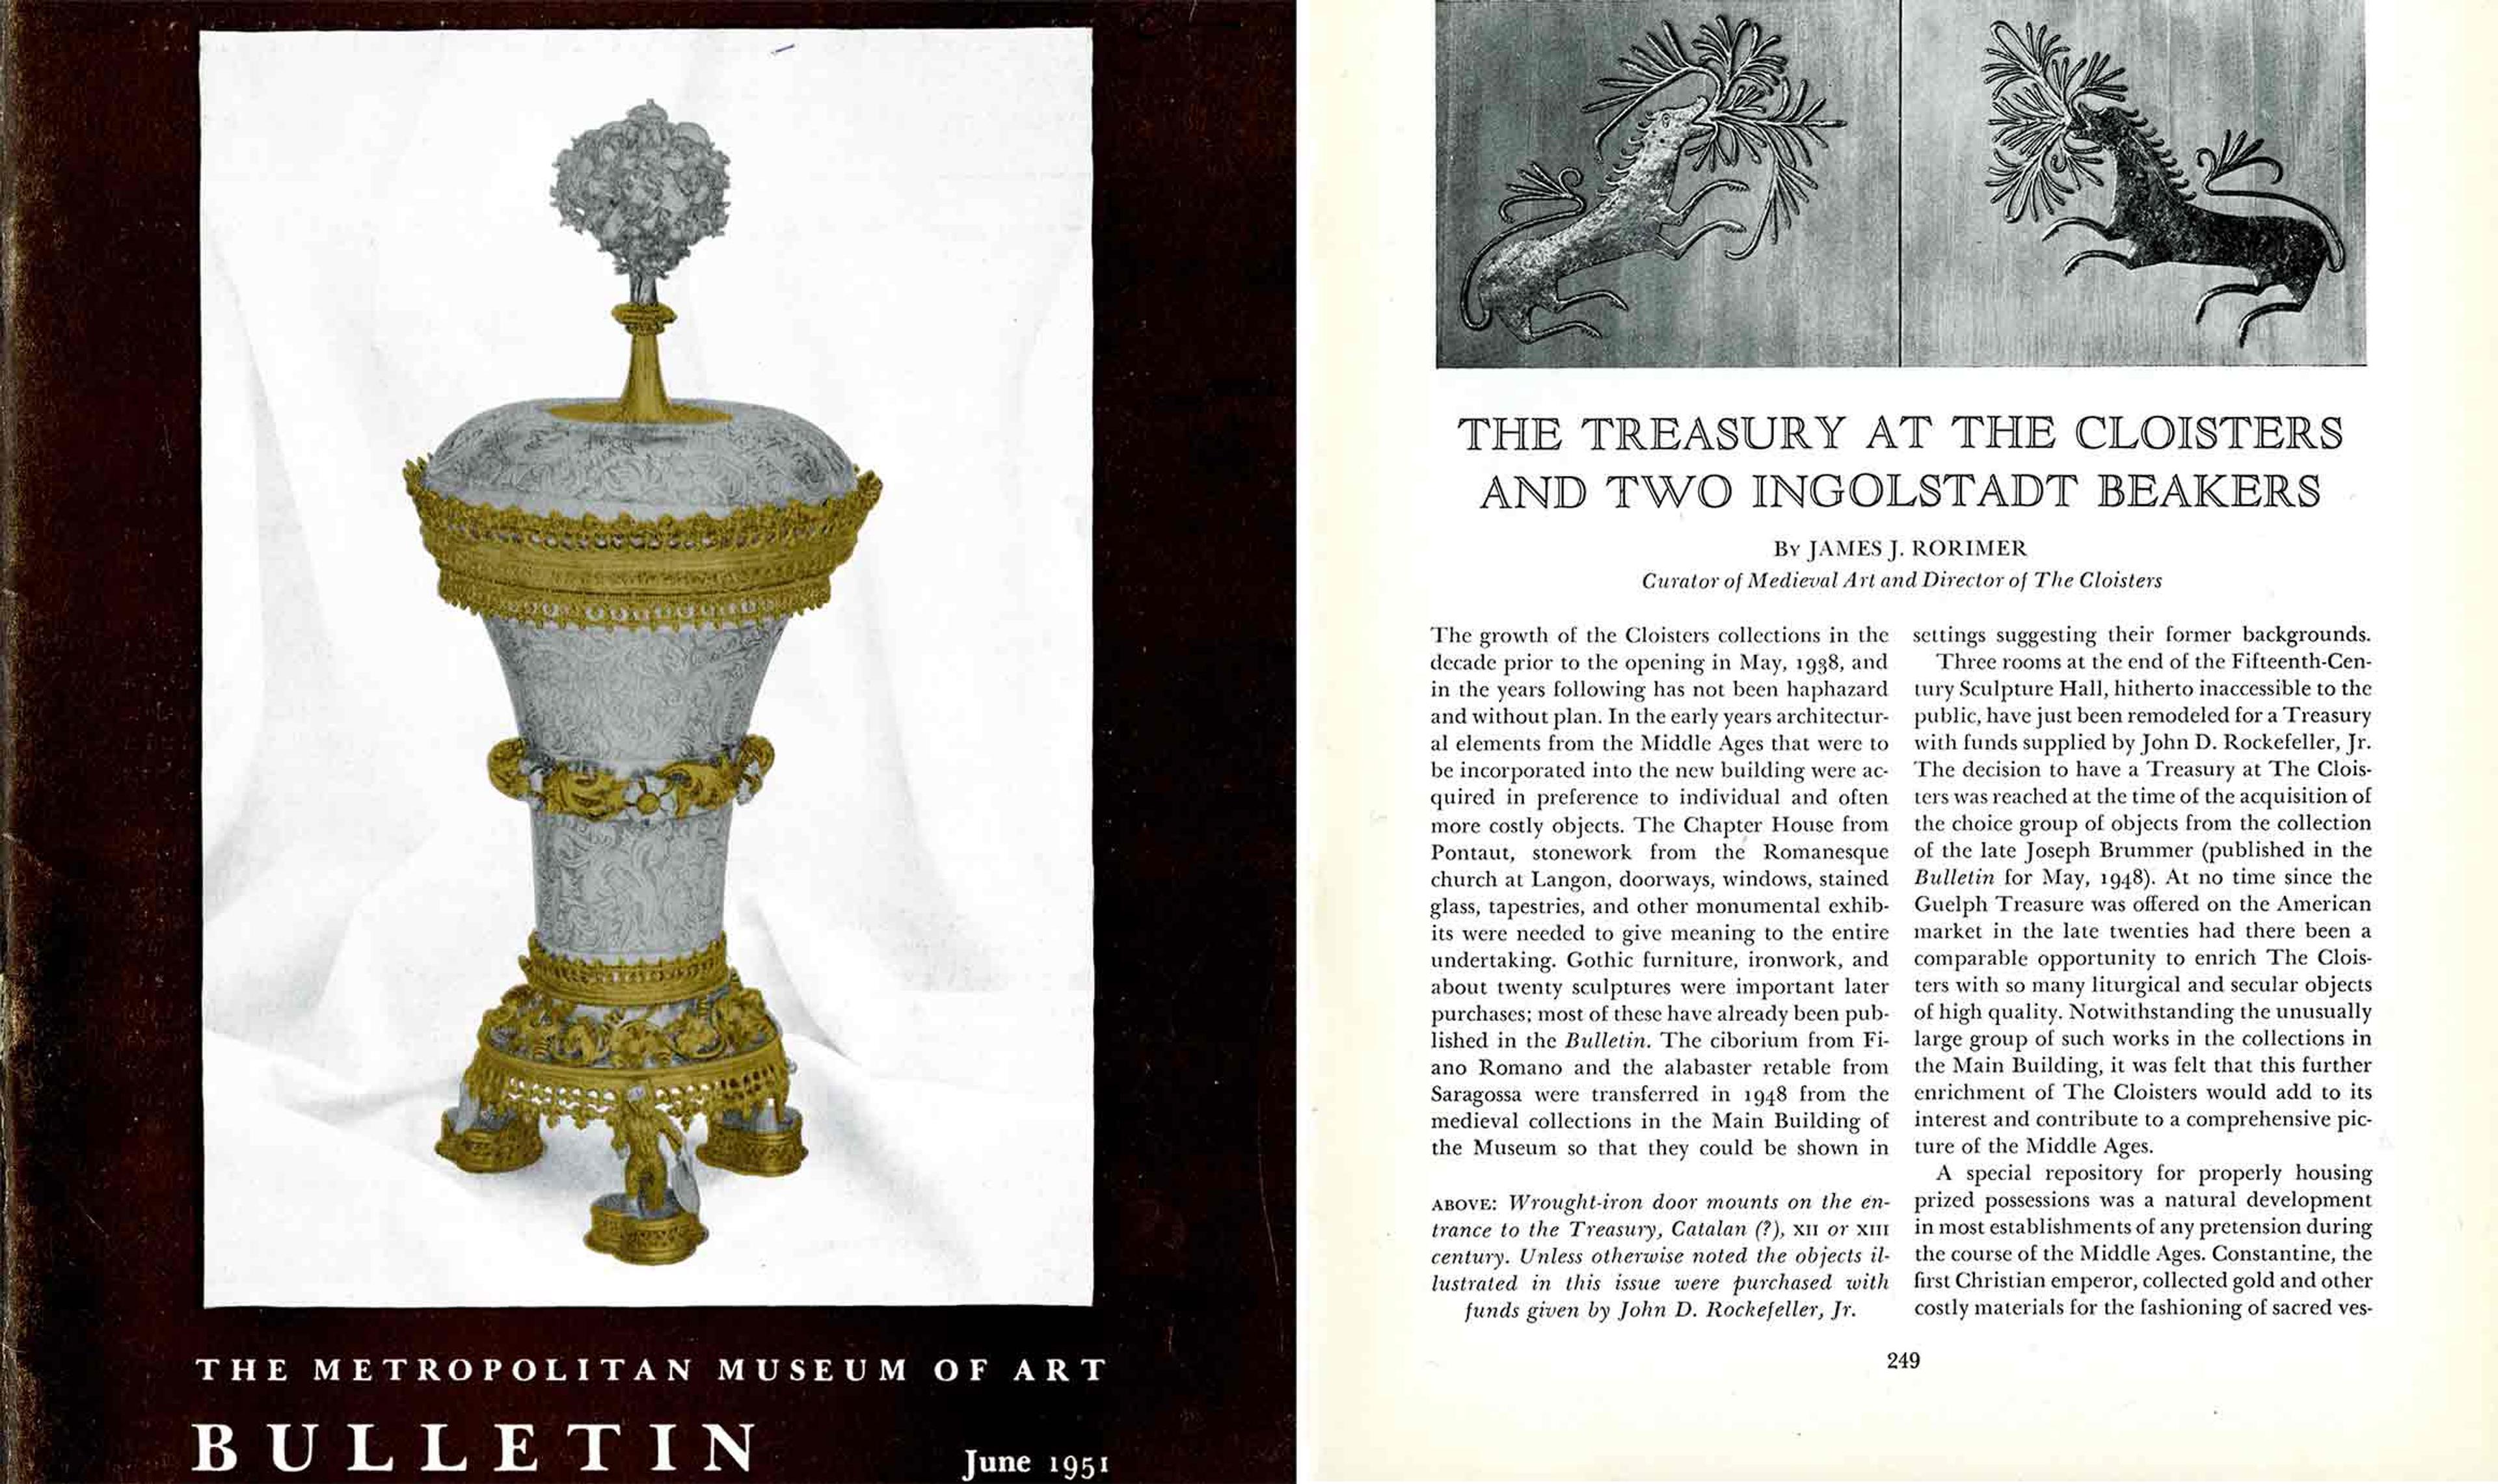 Photograph of two pages from a Metropolitan Museum of Art Bulletin. One page shows a beaker